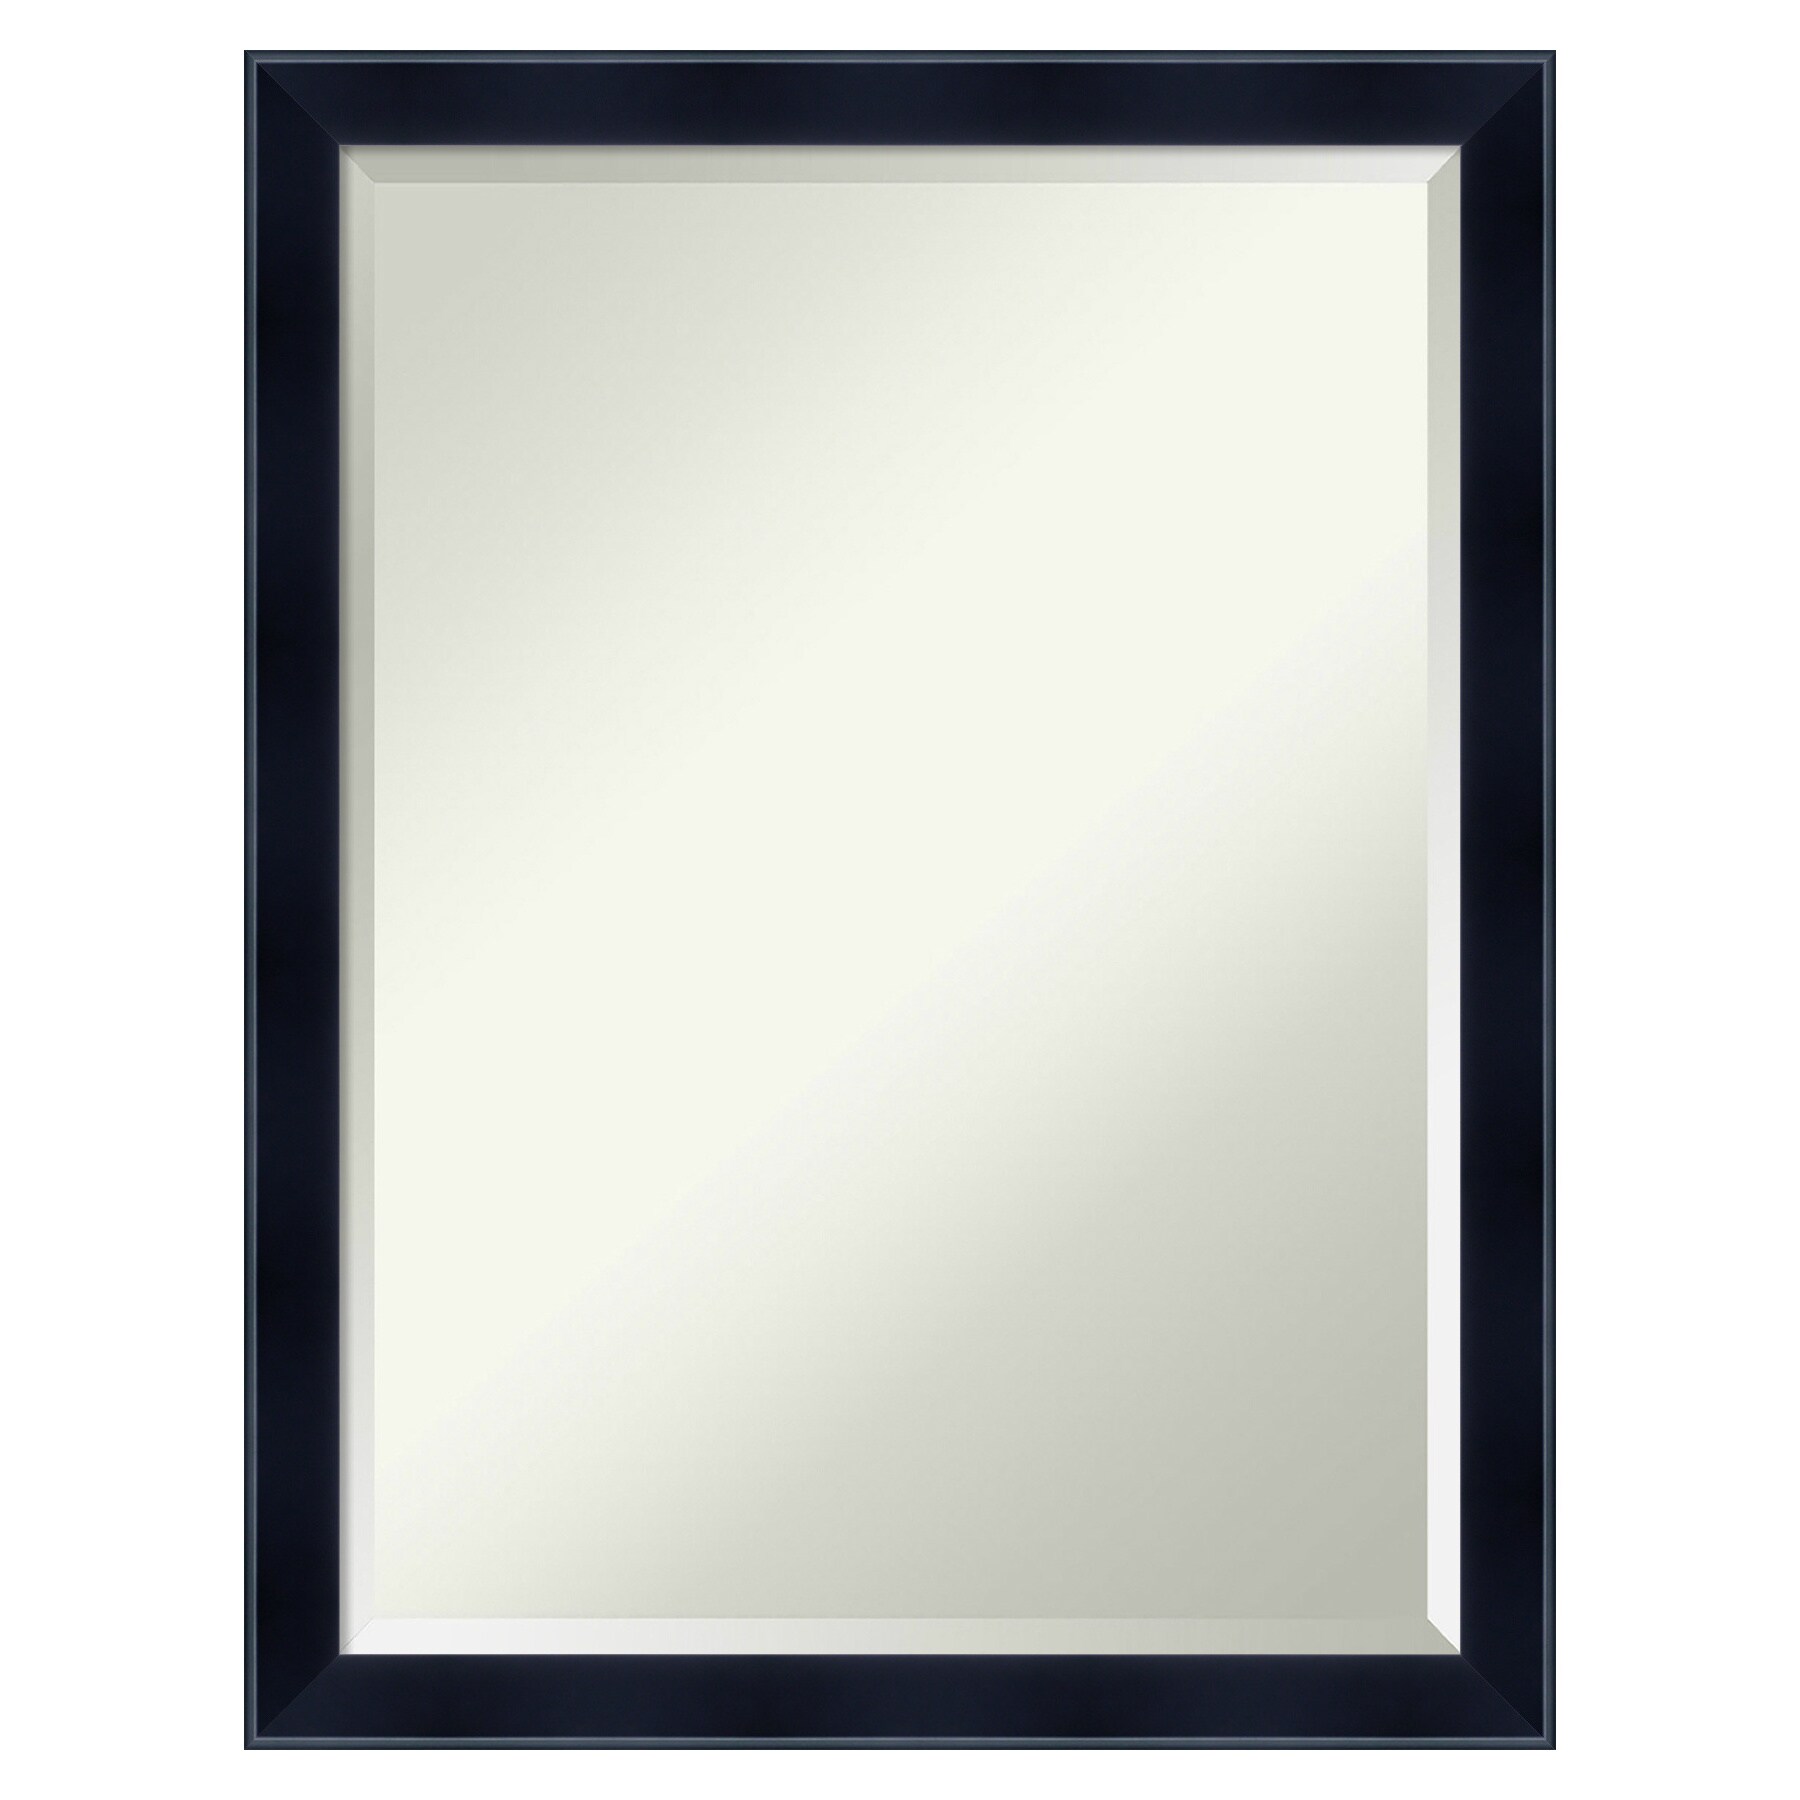 Matted to Scoop with White Mat Wall Frame, Whitewash, Sold by at Home